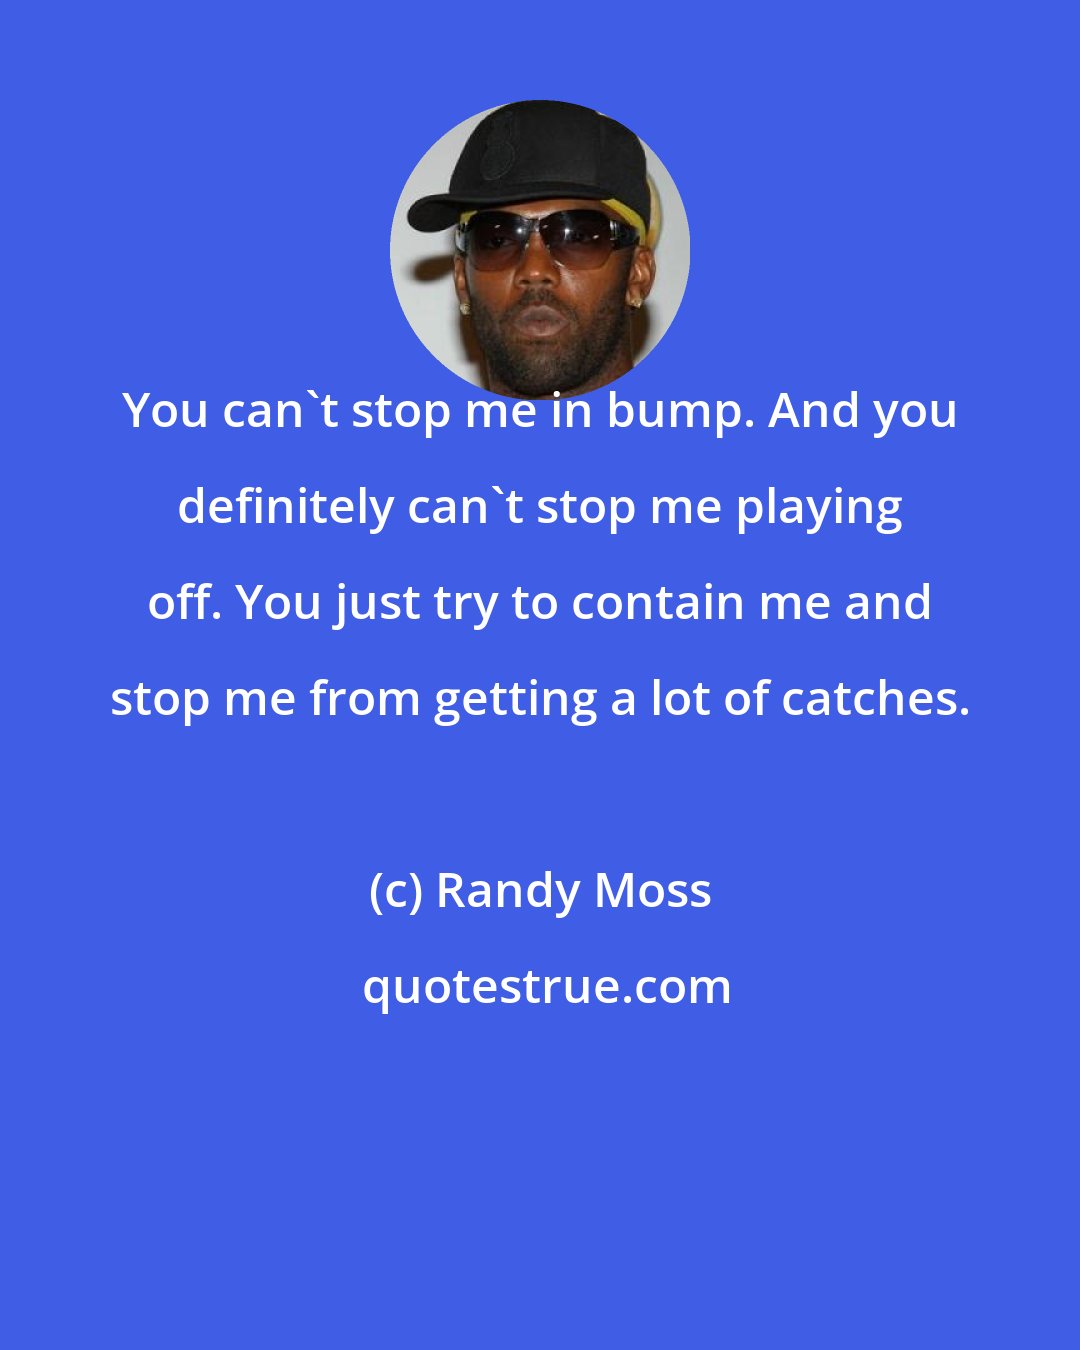 Randy Moss: You can't stop me in bump. And you definitely can't stop me playing off. You just try to contain me and stop me from getting a lot of catches.